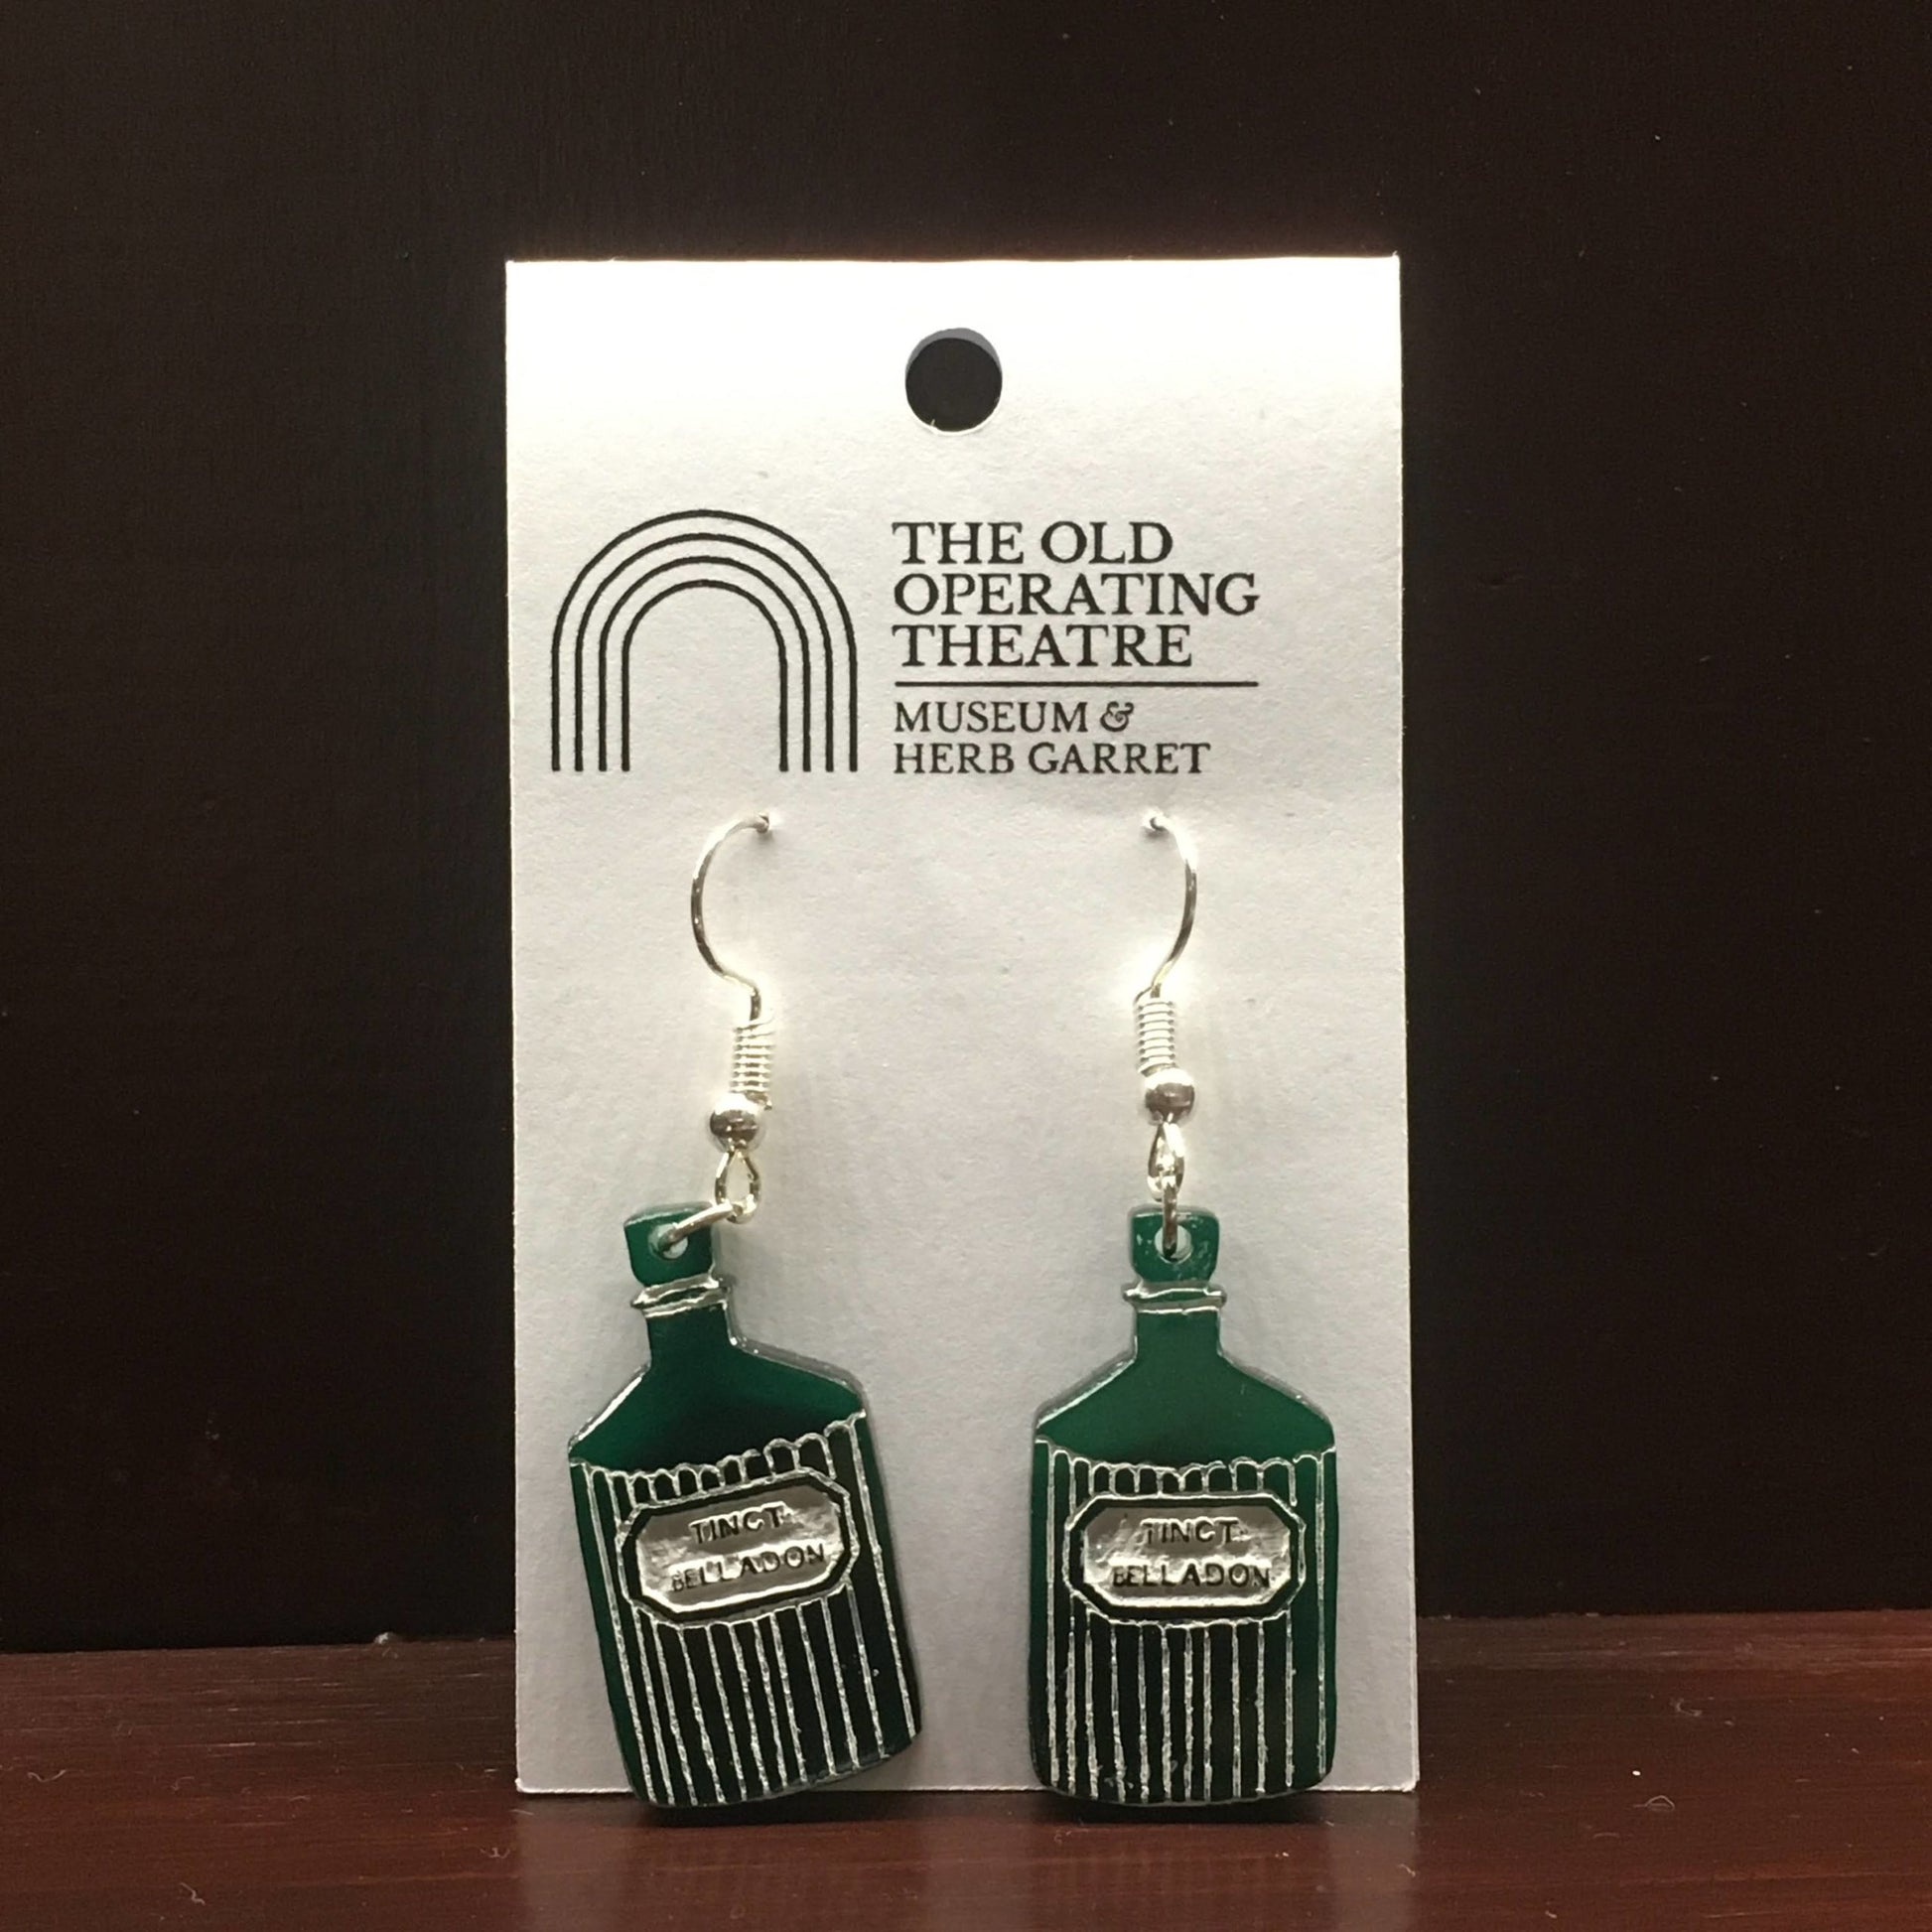 Pair of green dangle earrings in the shape of a bottle with the label 'tinct. belladon'